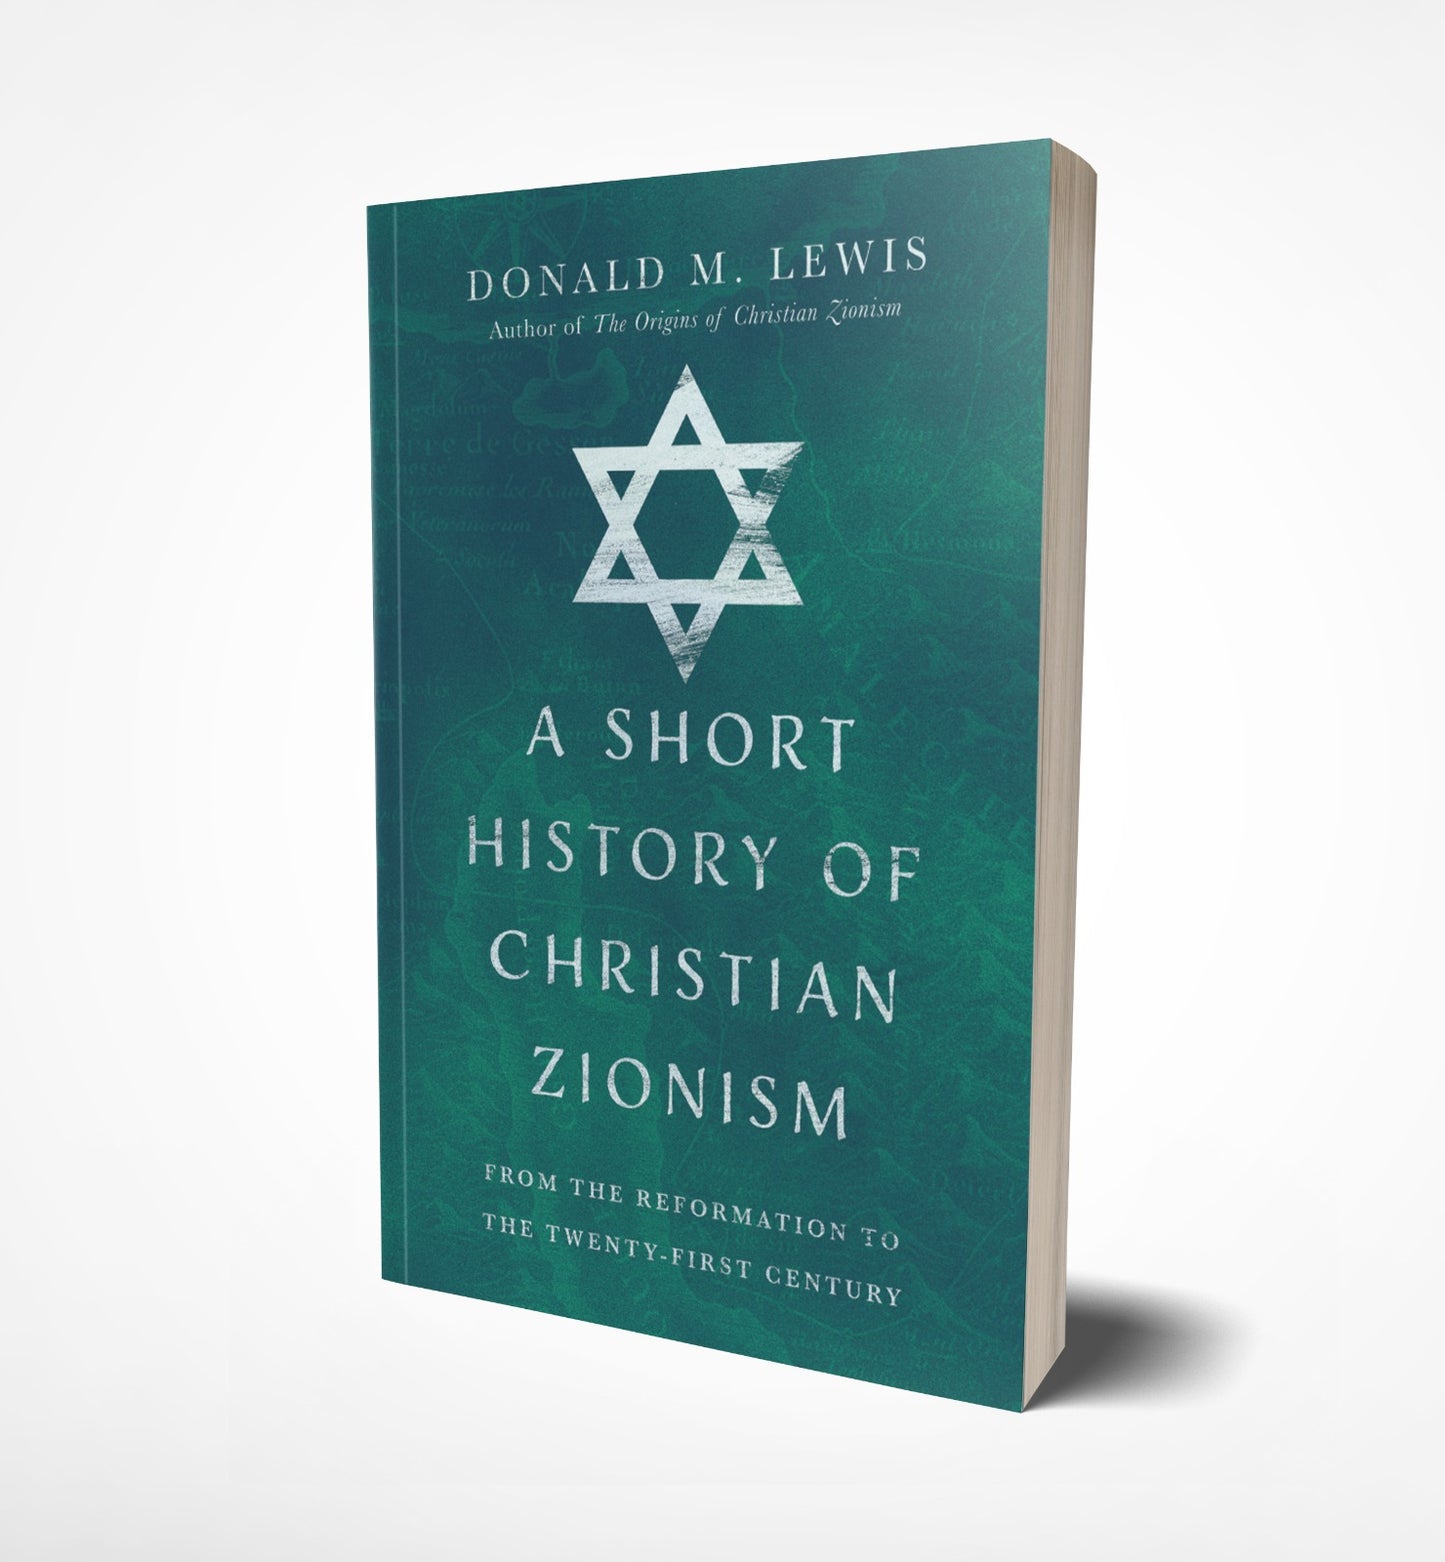 A Short History of Christian Zionism From the Reformation to the Twenty-First Century by Donald M. Lewis - Book